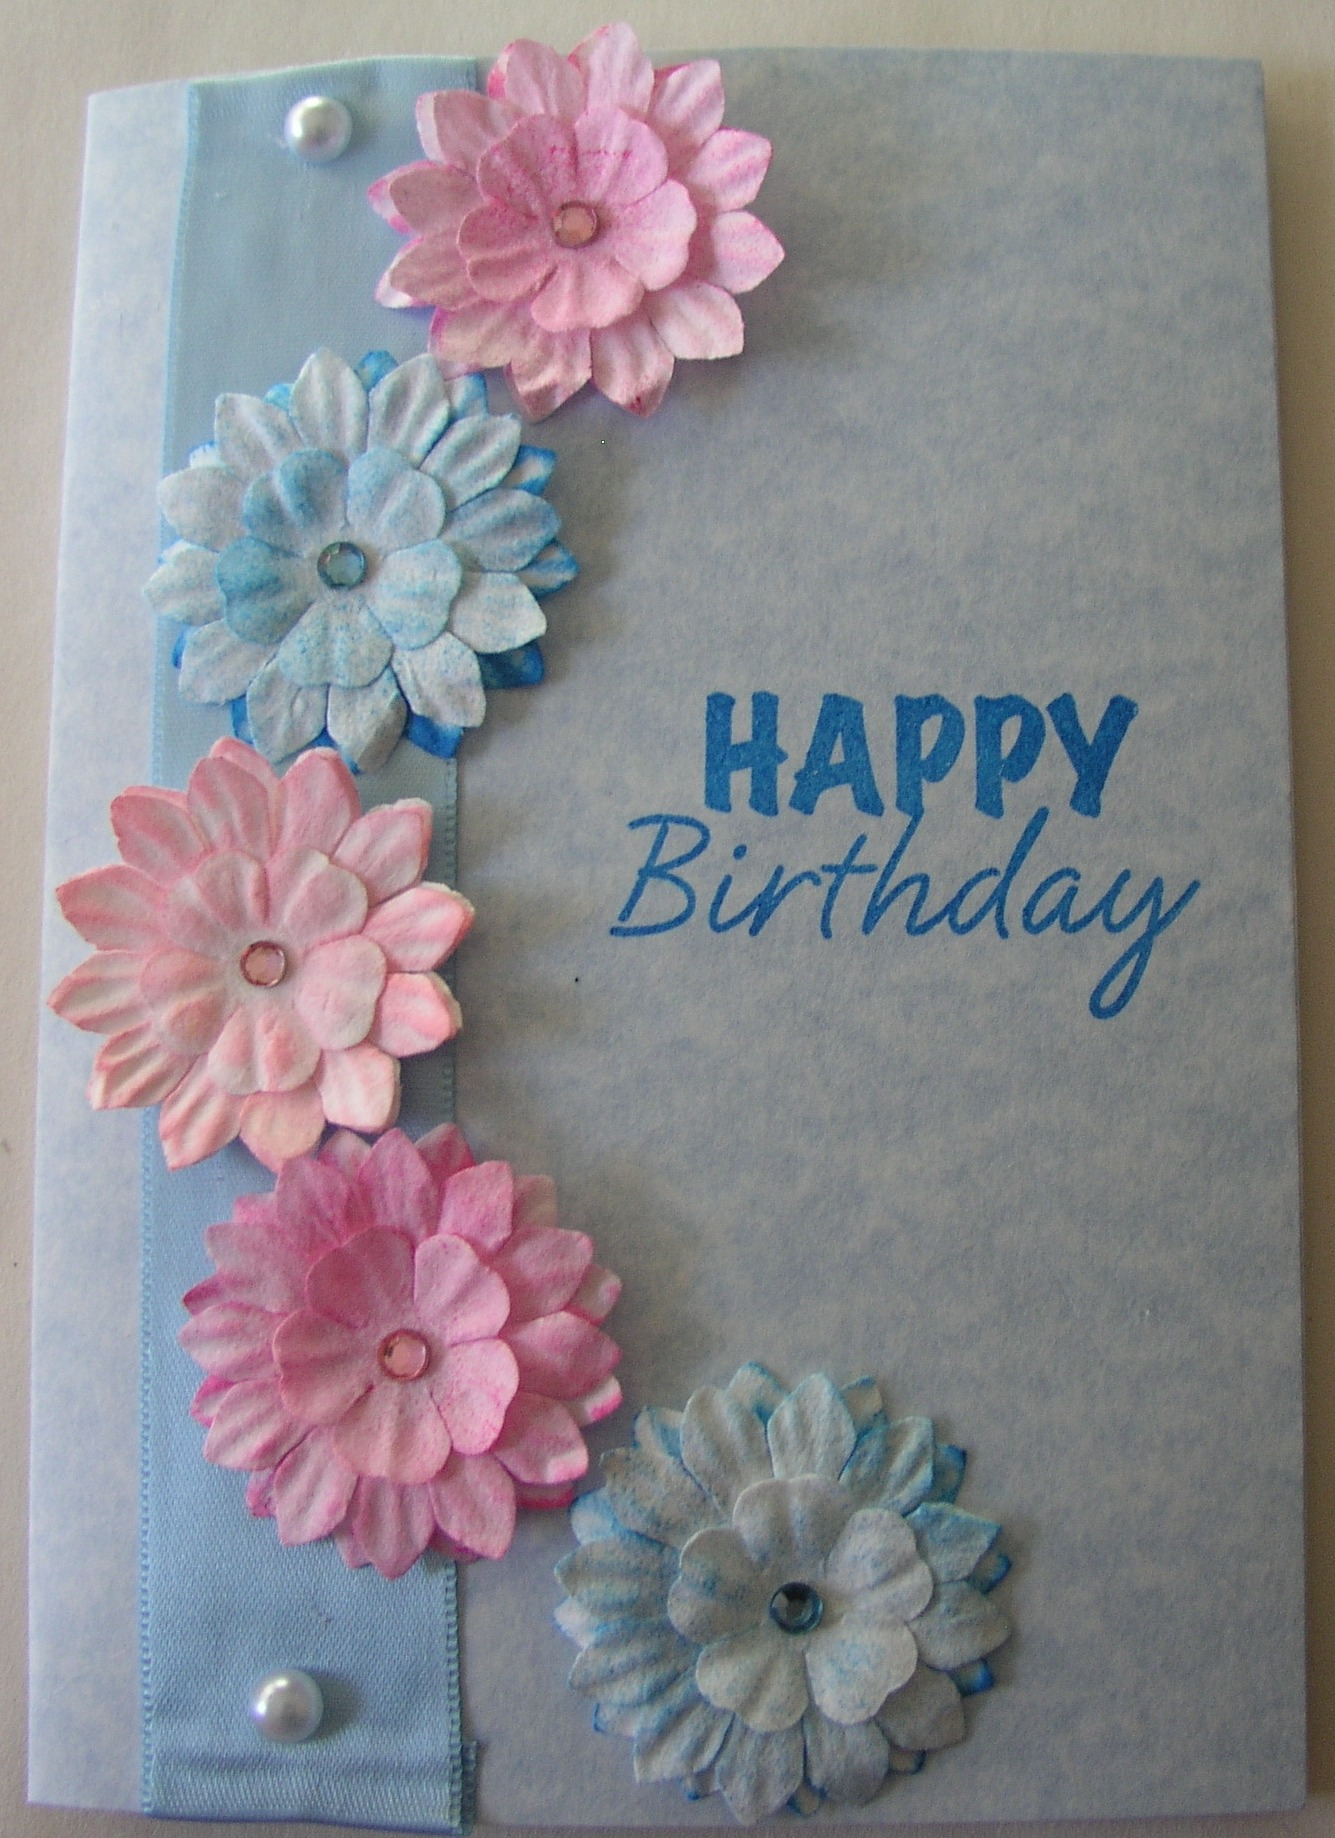 Ideas To Make Greeting Cards For Birthday 97 Birthday Greetings Cards Making The Greeting Cards Industry Is